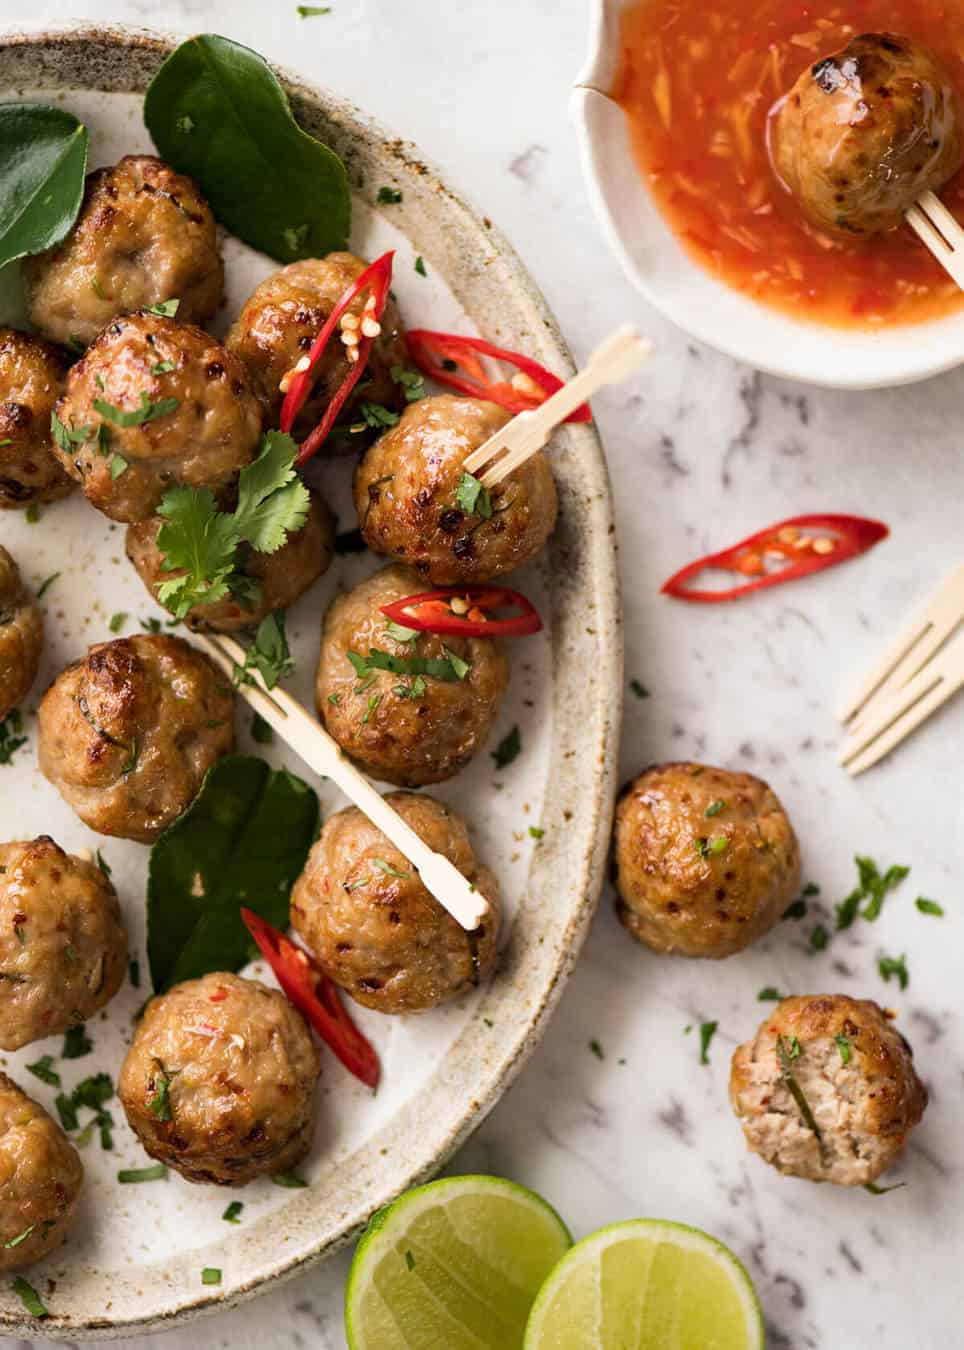 These Thai Meatballs are packed with bright, earthy Thai flavours! Make these with chicken or pork. recipetineats.com